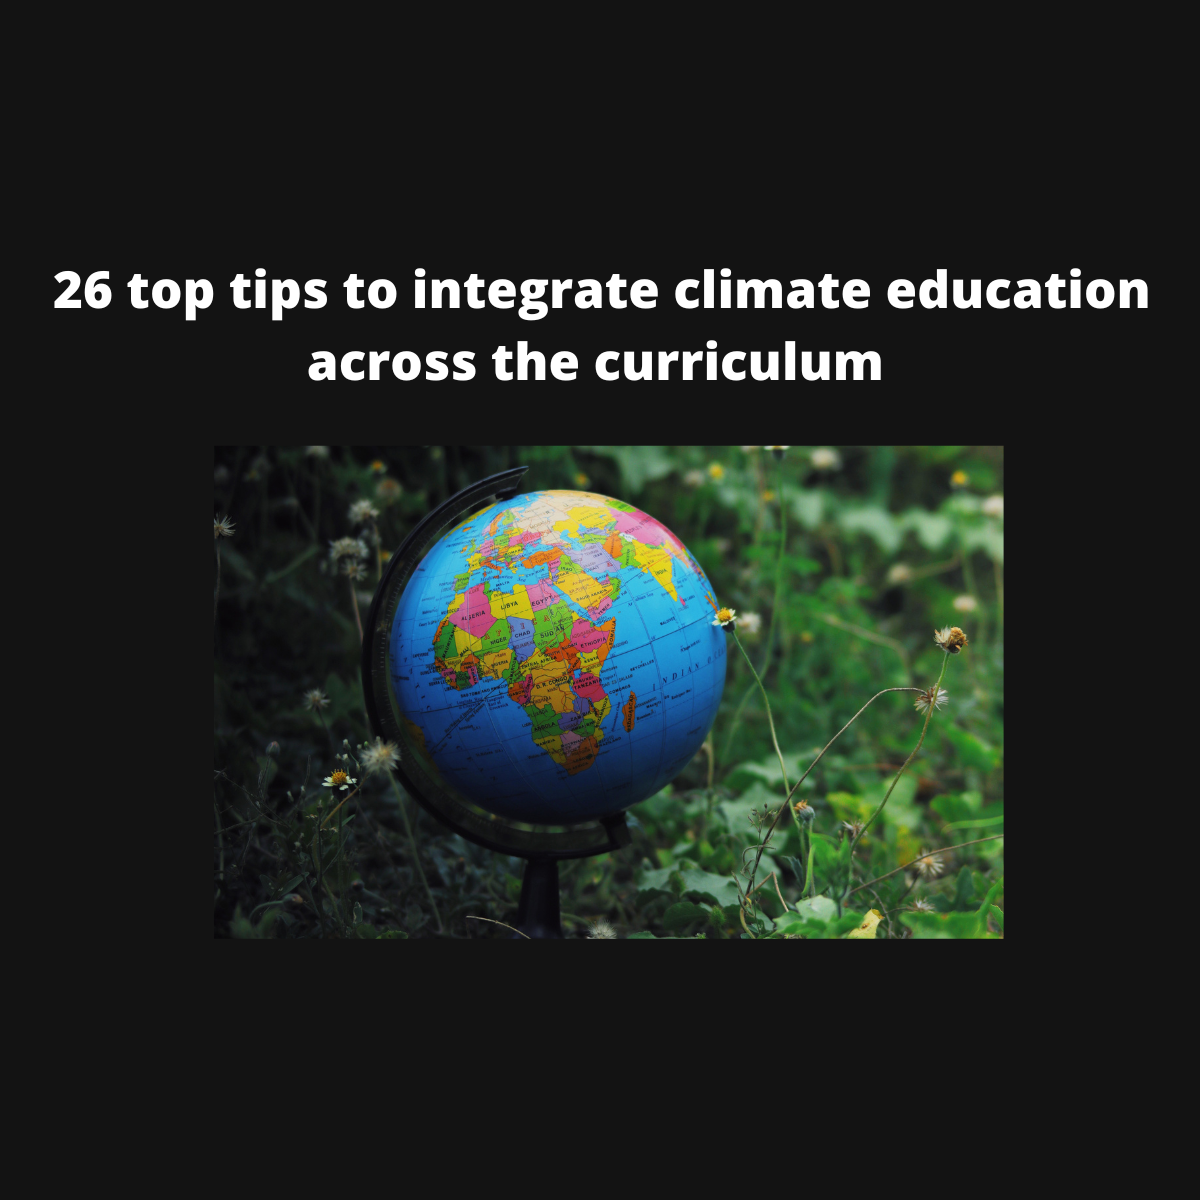 26 top tips to integrate climate education across the curriculum